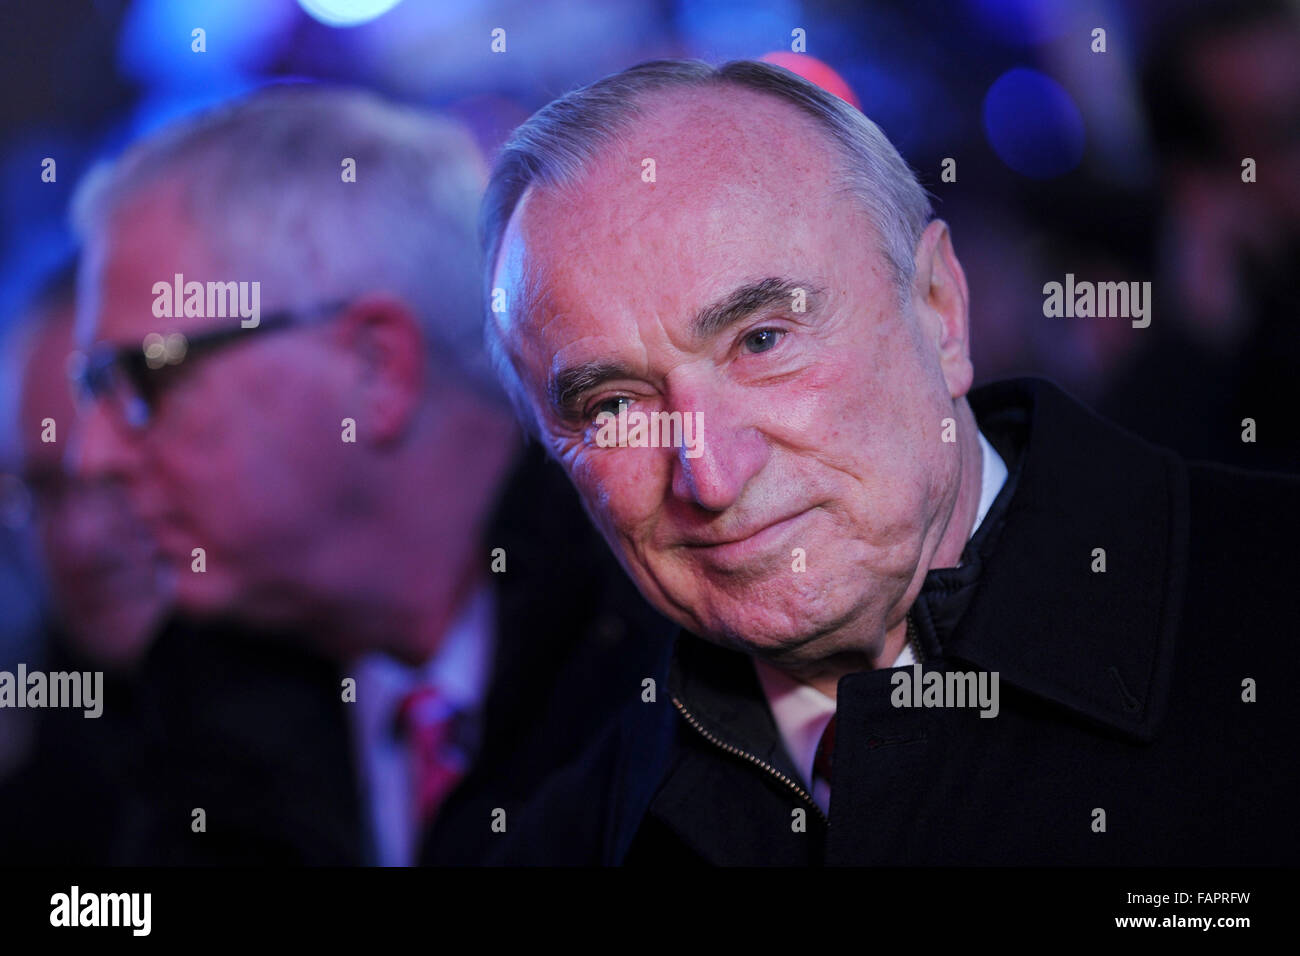 New York City. 31st Dec, 2015. New York City Police Commissioner William Bratton attends the New Year's Eve celebrations at Times Square on December 31, 2015 in New York City. © dpa/Alamy Live News Stock Photo